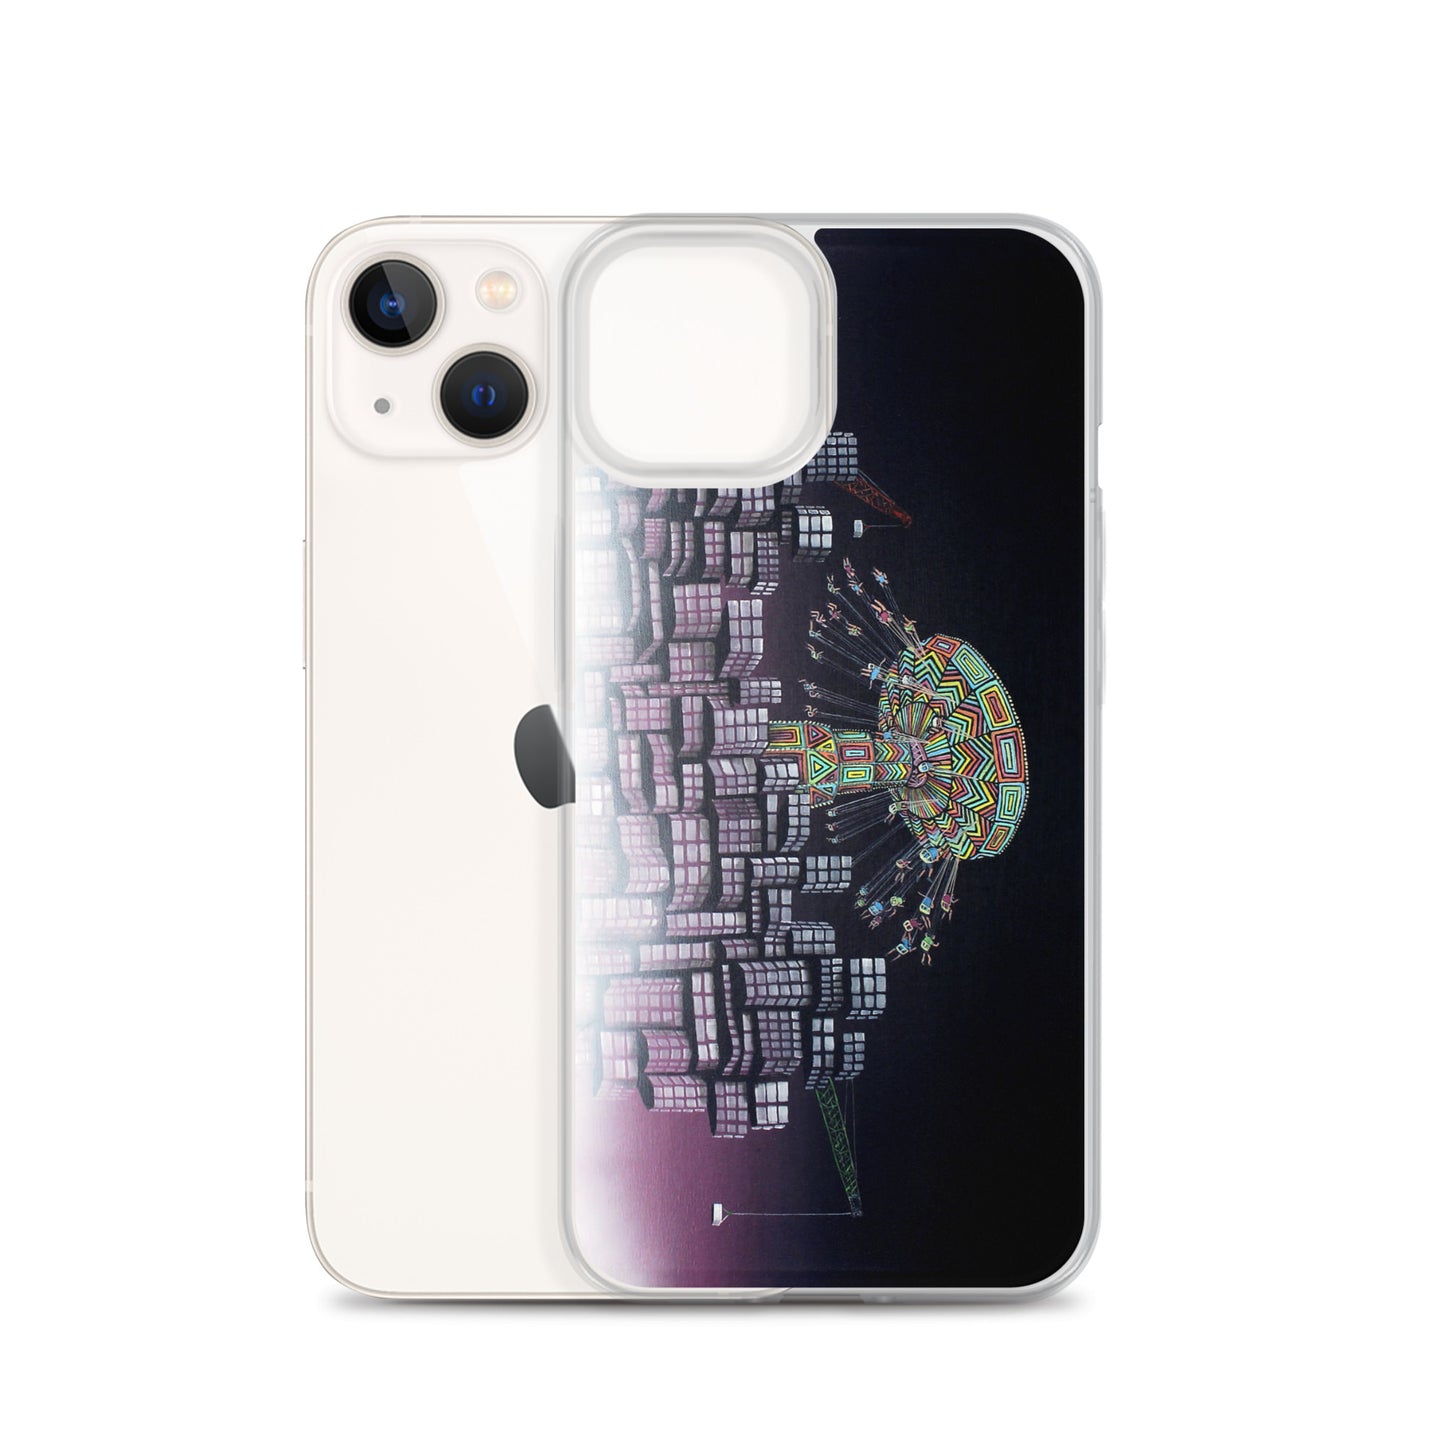 Carousel in the Sky iPhone Case